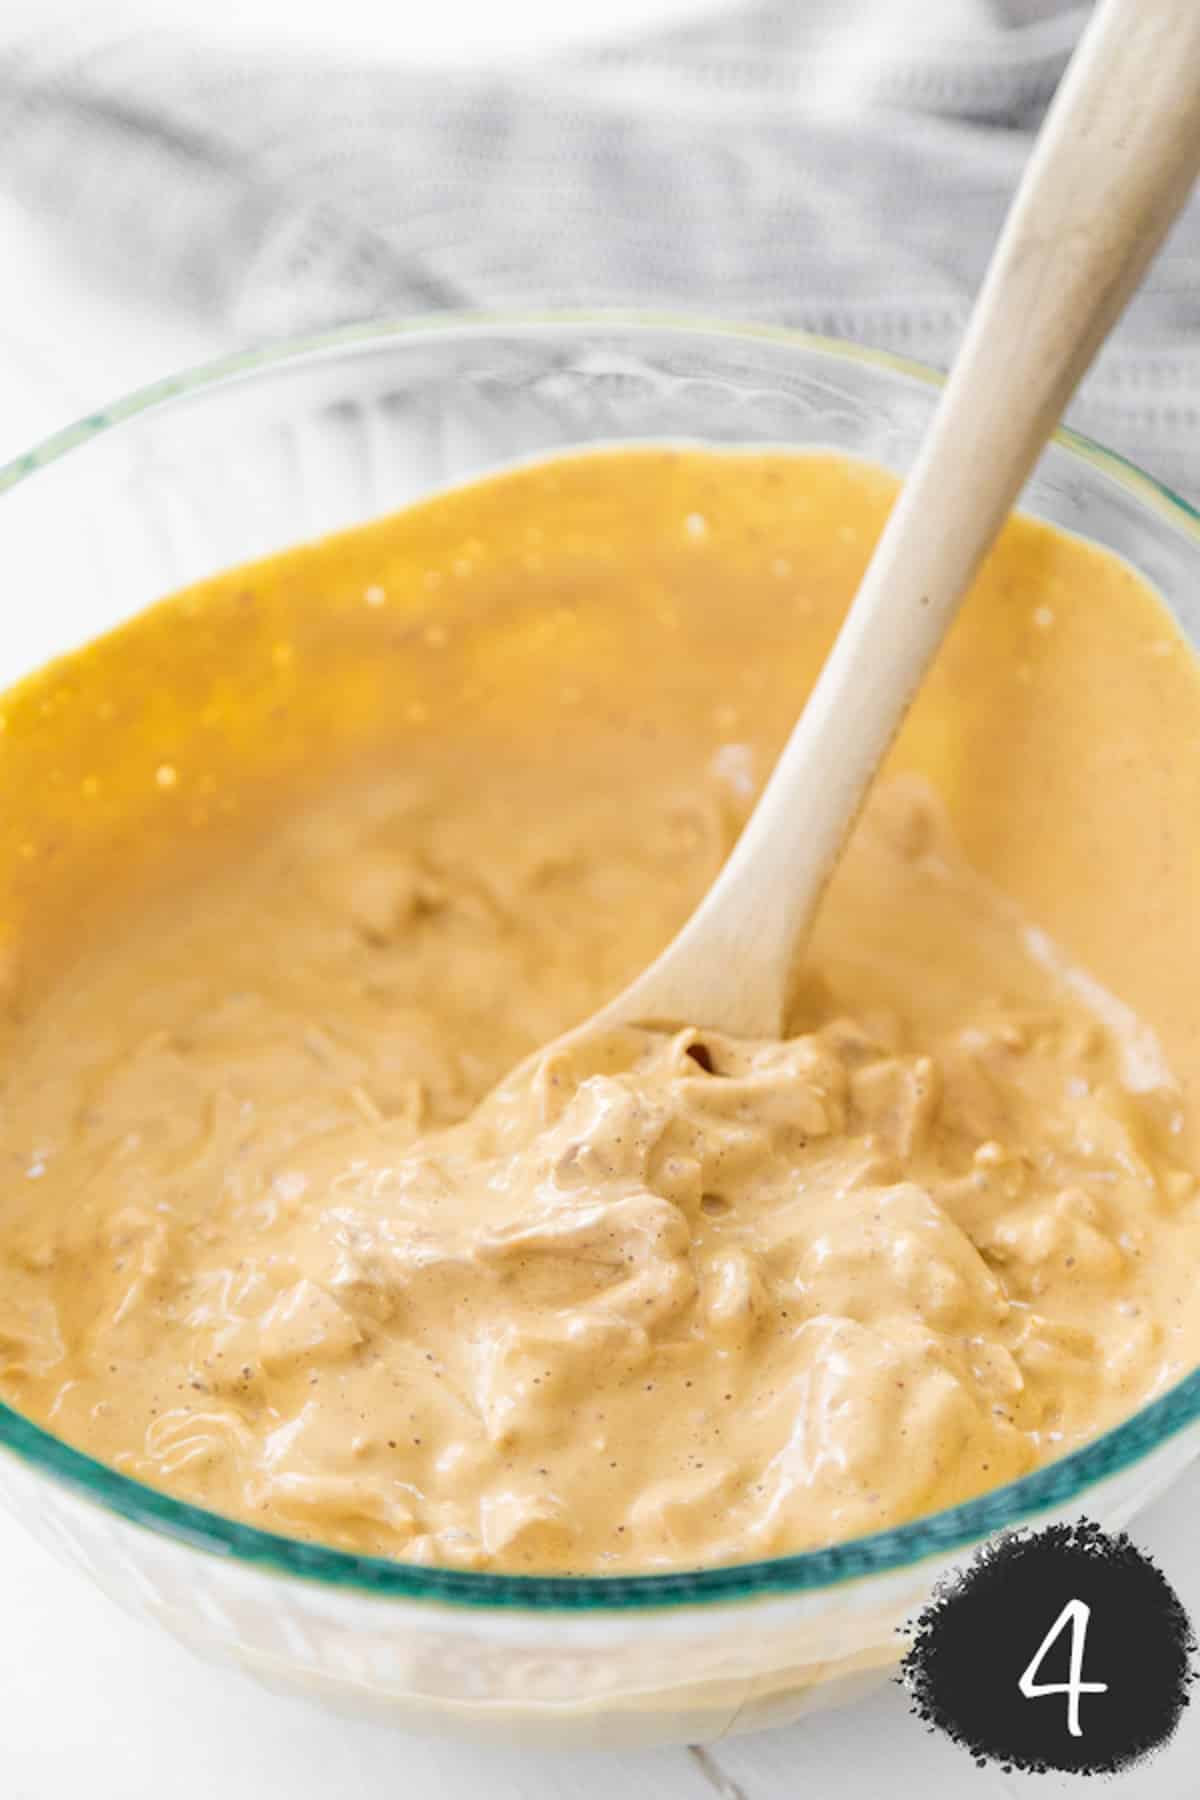 A spoon stirring shredded jackfruit and a creamy buffalo sauce together in a large glass mixing bowl.